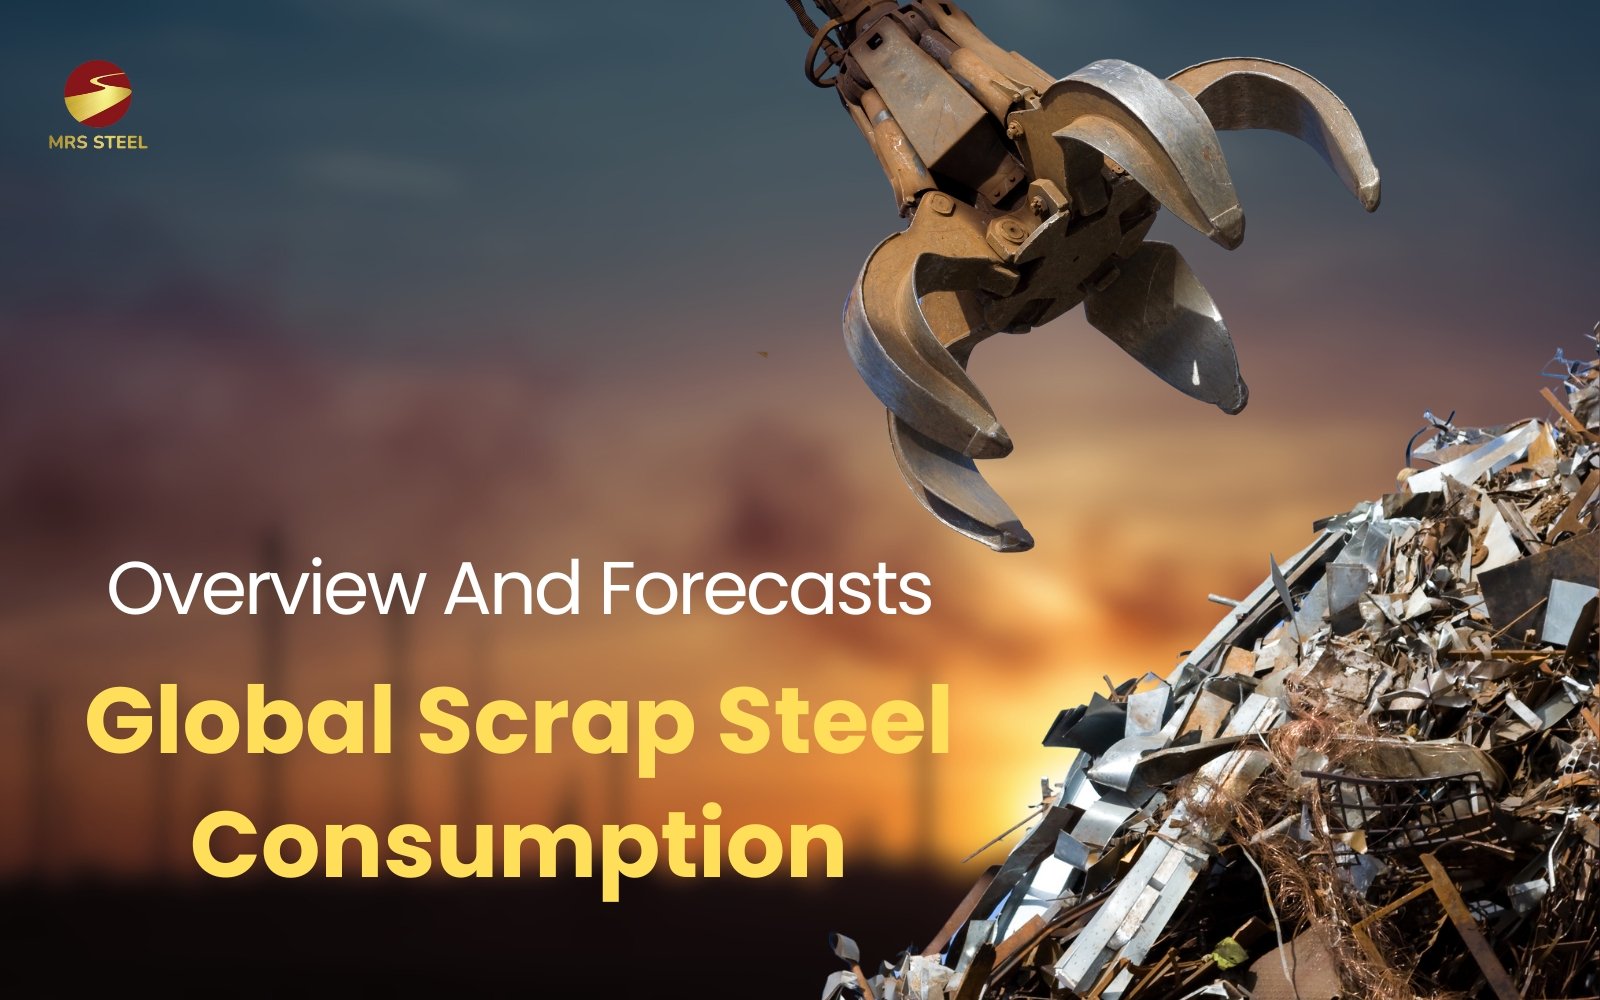 Overview and forecasts for global scrap steel consumption